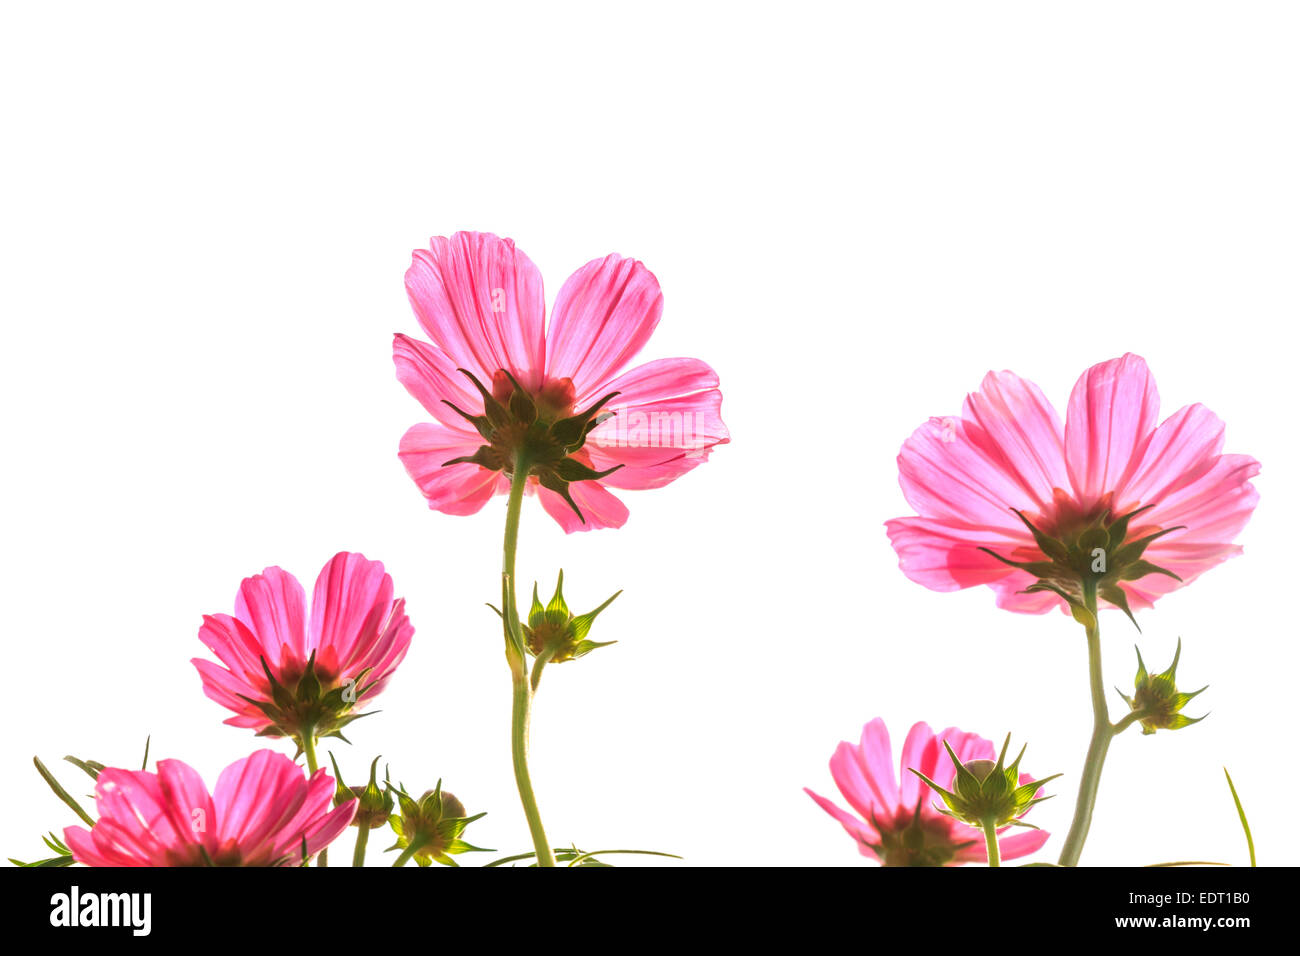 pink cosmos (Cosmos sulphureus) with translucent at petal on white background (isolated) Stock Photo